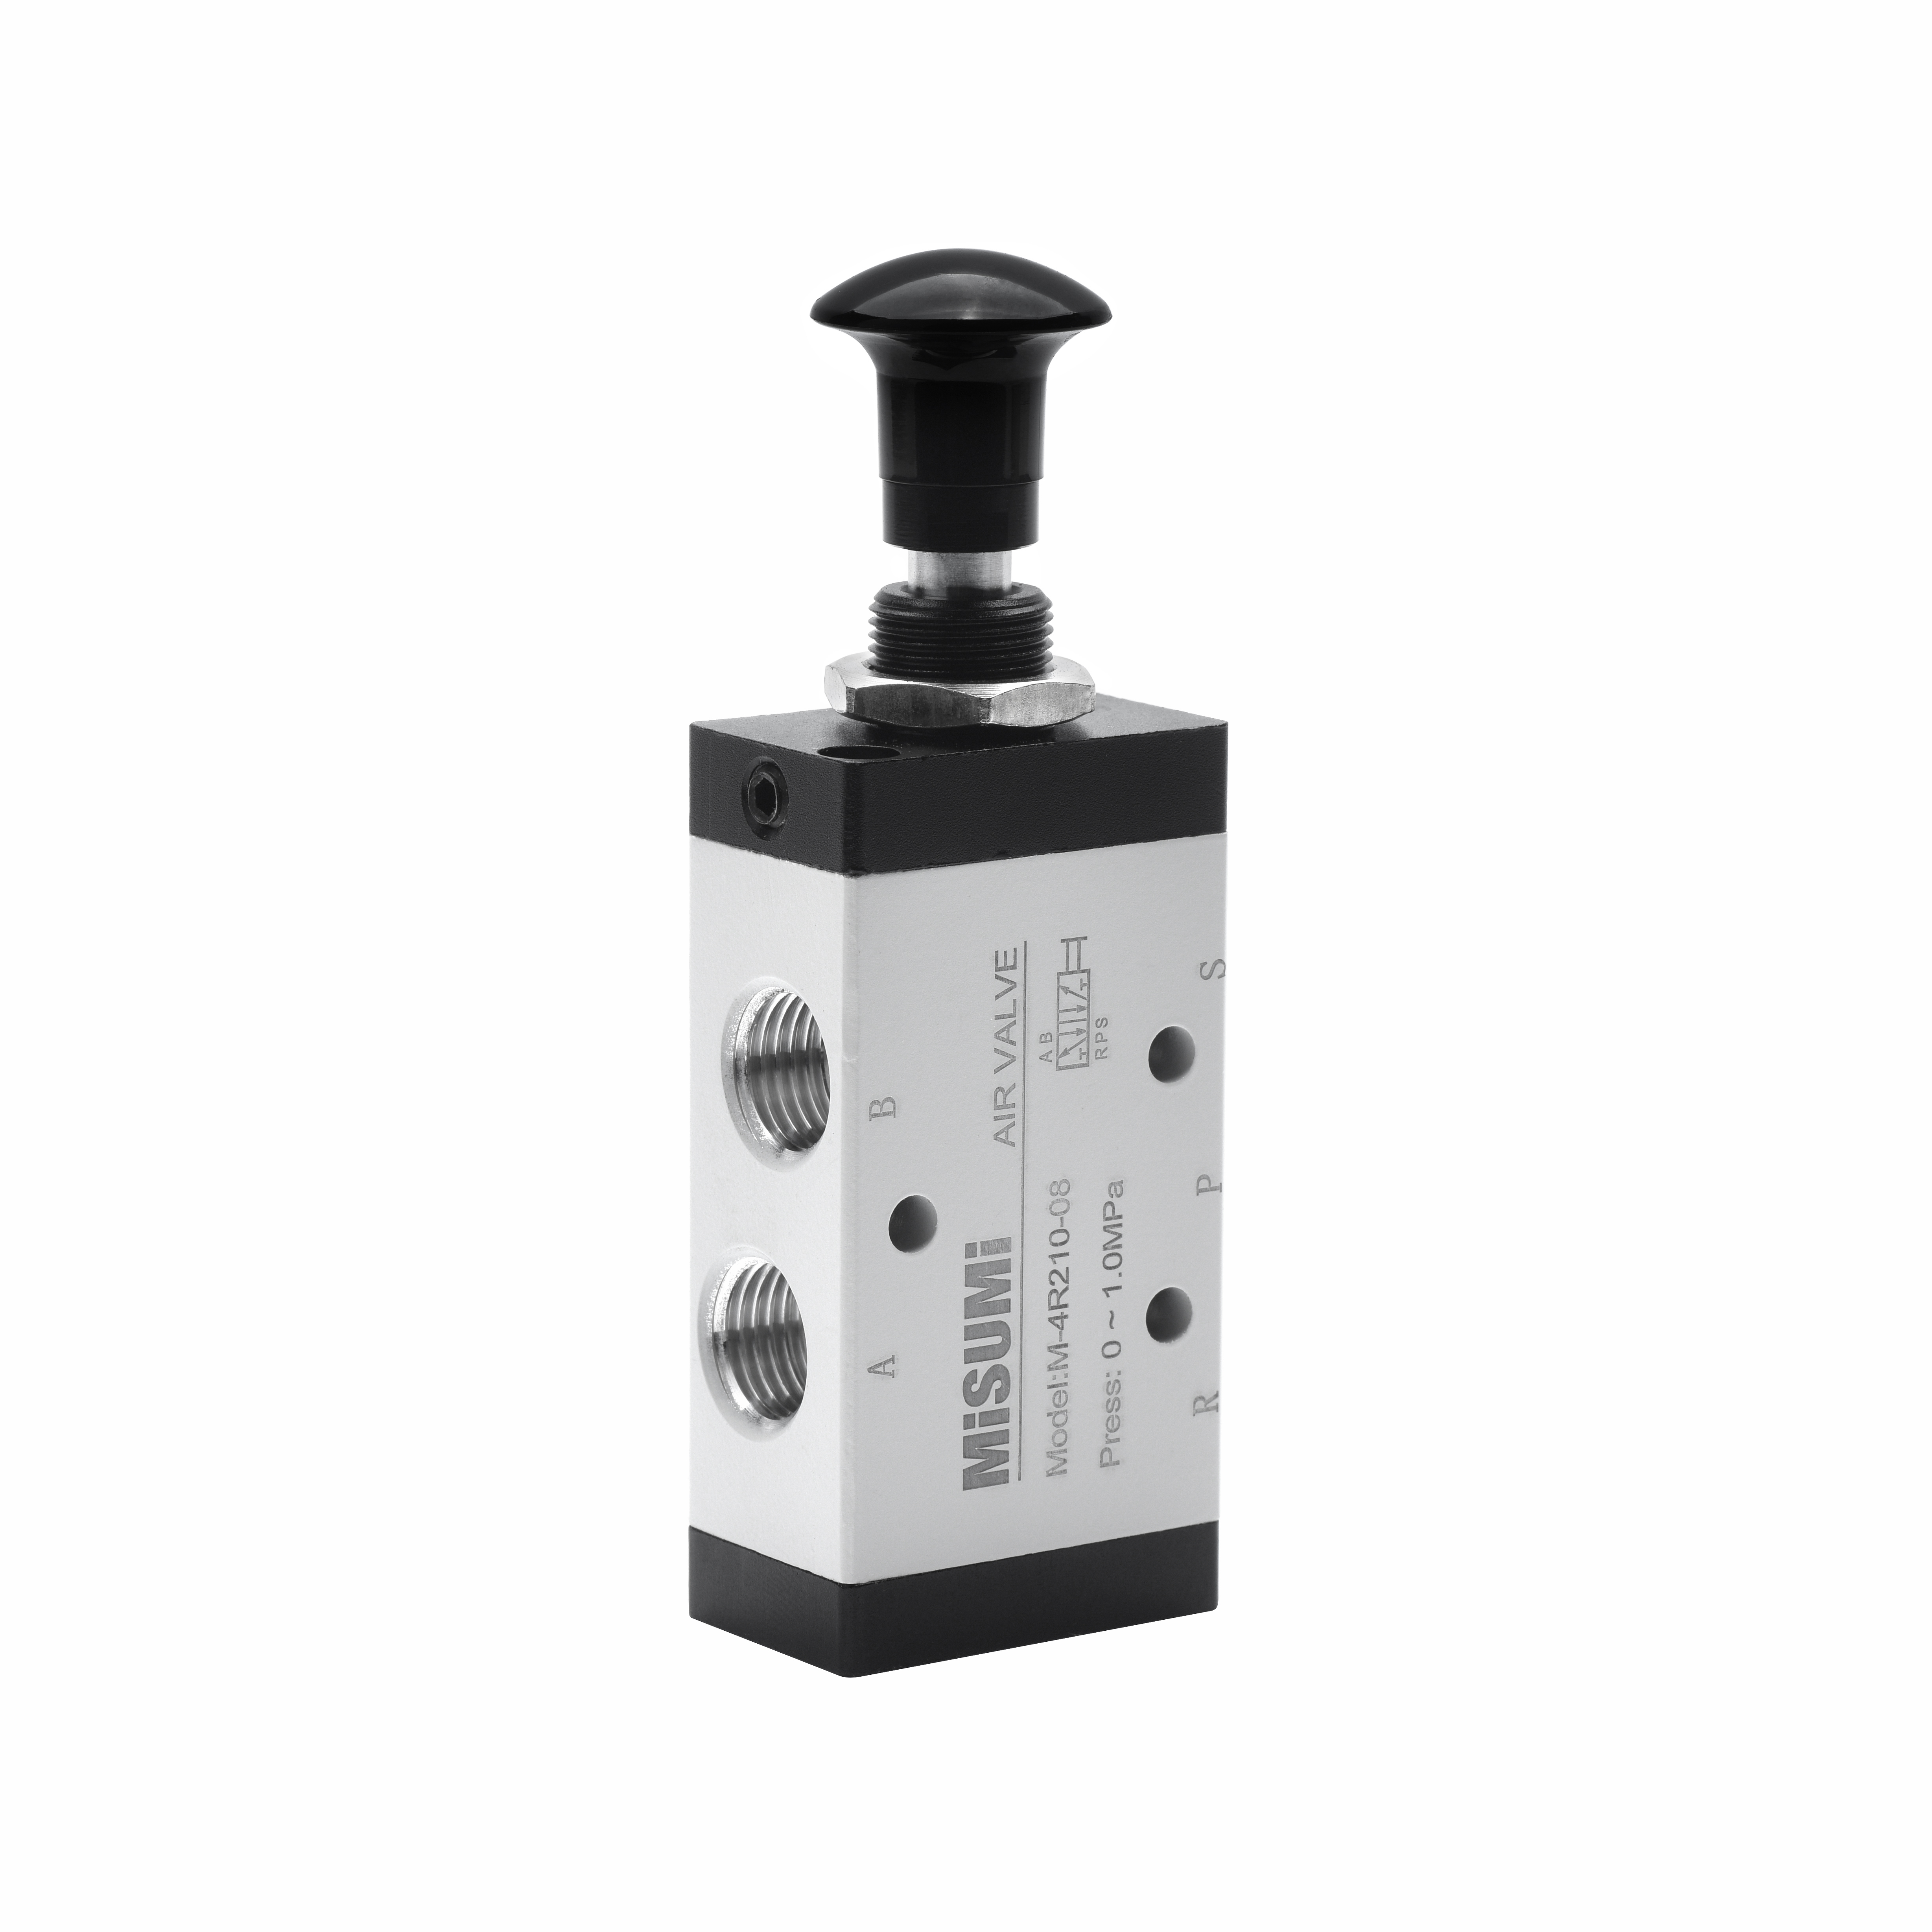 Hand Switching Valves With Pull Knob (E-MVP110-01-S)